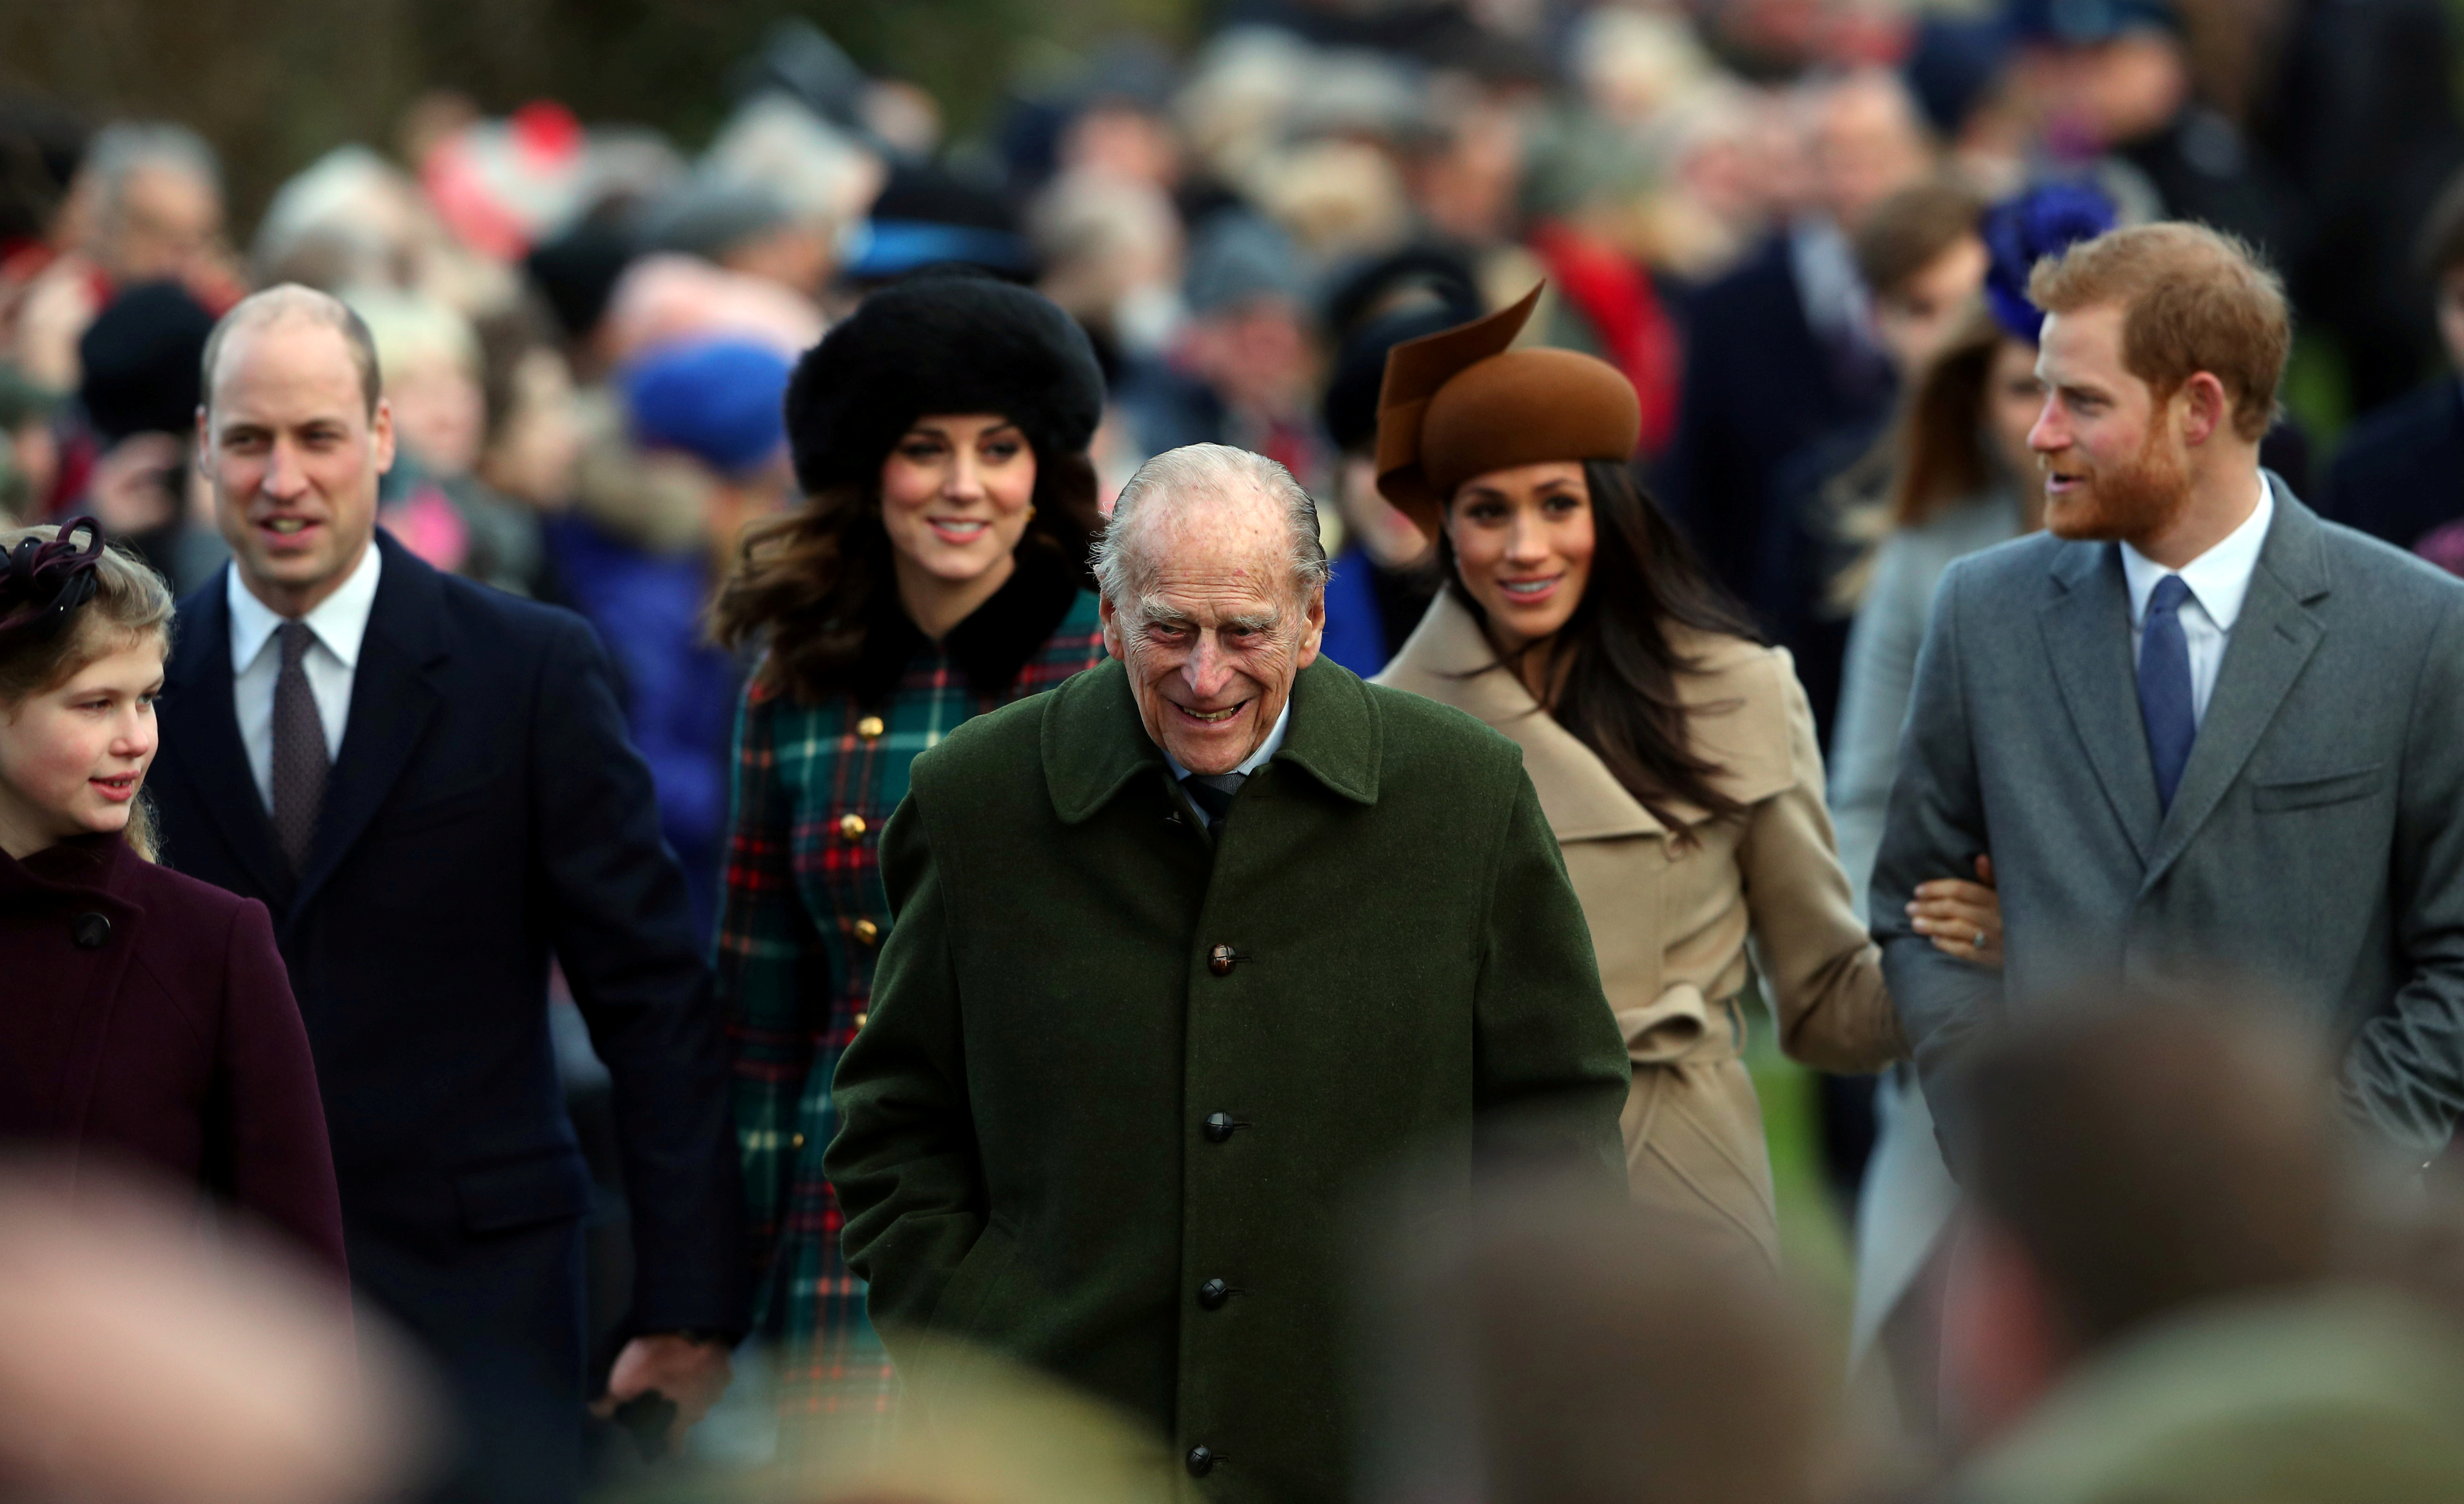 Britain's Prince Philip, the Duke of Edinburgh, leads members of the royal family as they arrive to attend the Christmas Day church service on the Sandringham estate in eastern England, Britain, December 25, 2017. REUTERS/Hannah McKay     TPX IMAGES OF THE DAY - RC13339F3B70